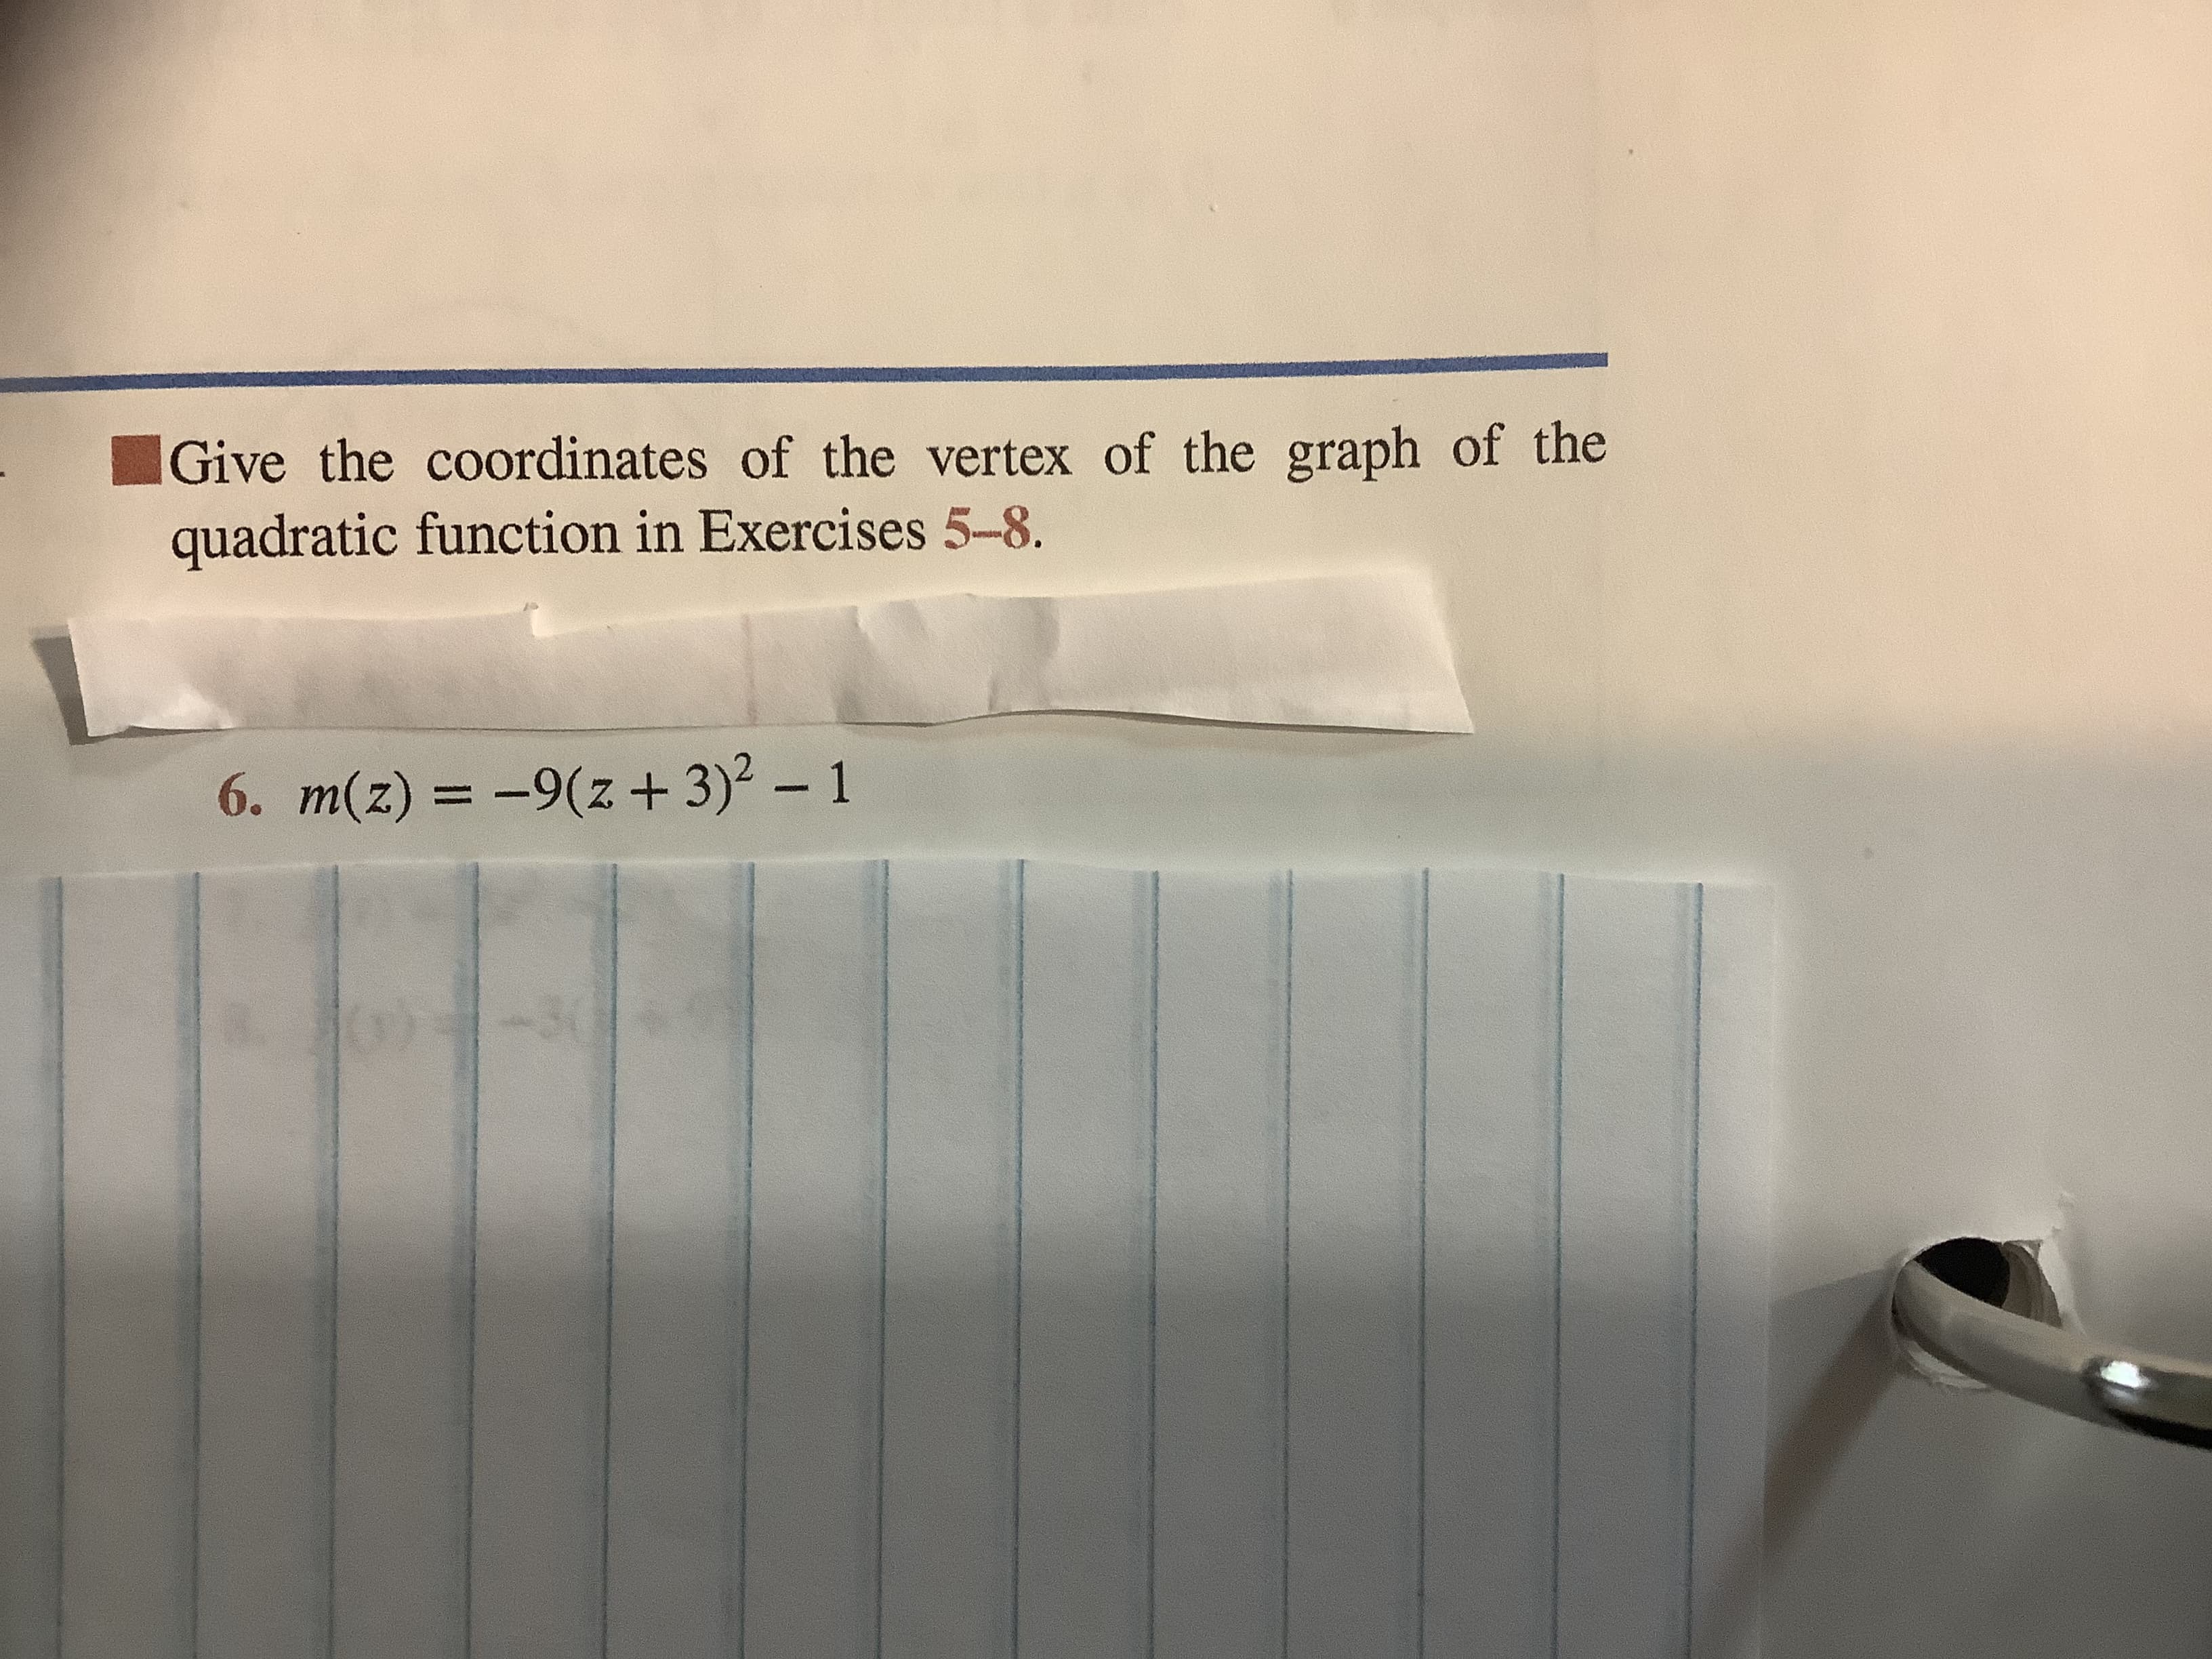 Give the coordinates of the vertex of the graph of the
quadratic function in Exercises 5-8.
6. m(z) = -9(z + 3)2 - 1
-30
